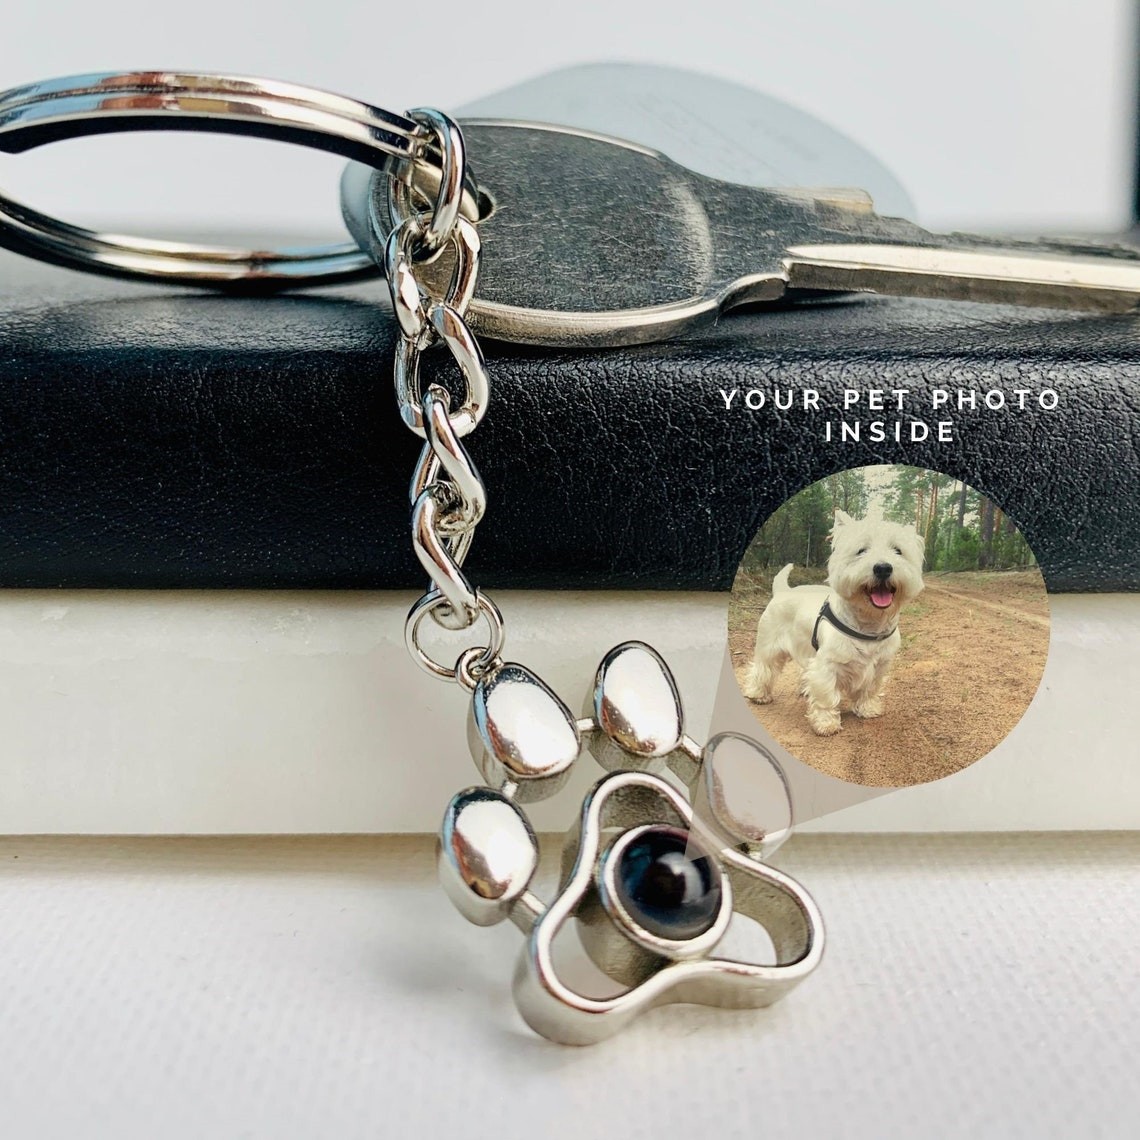 Personalized Pet Photo Projection Keychain with Pet Photo Inside